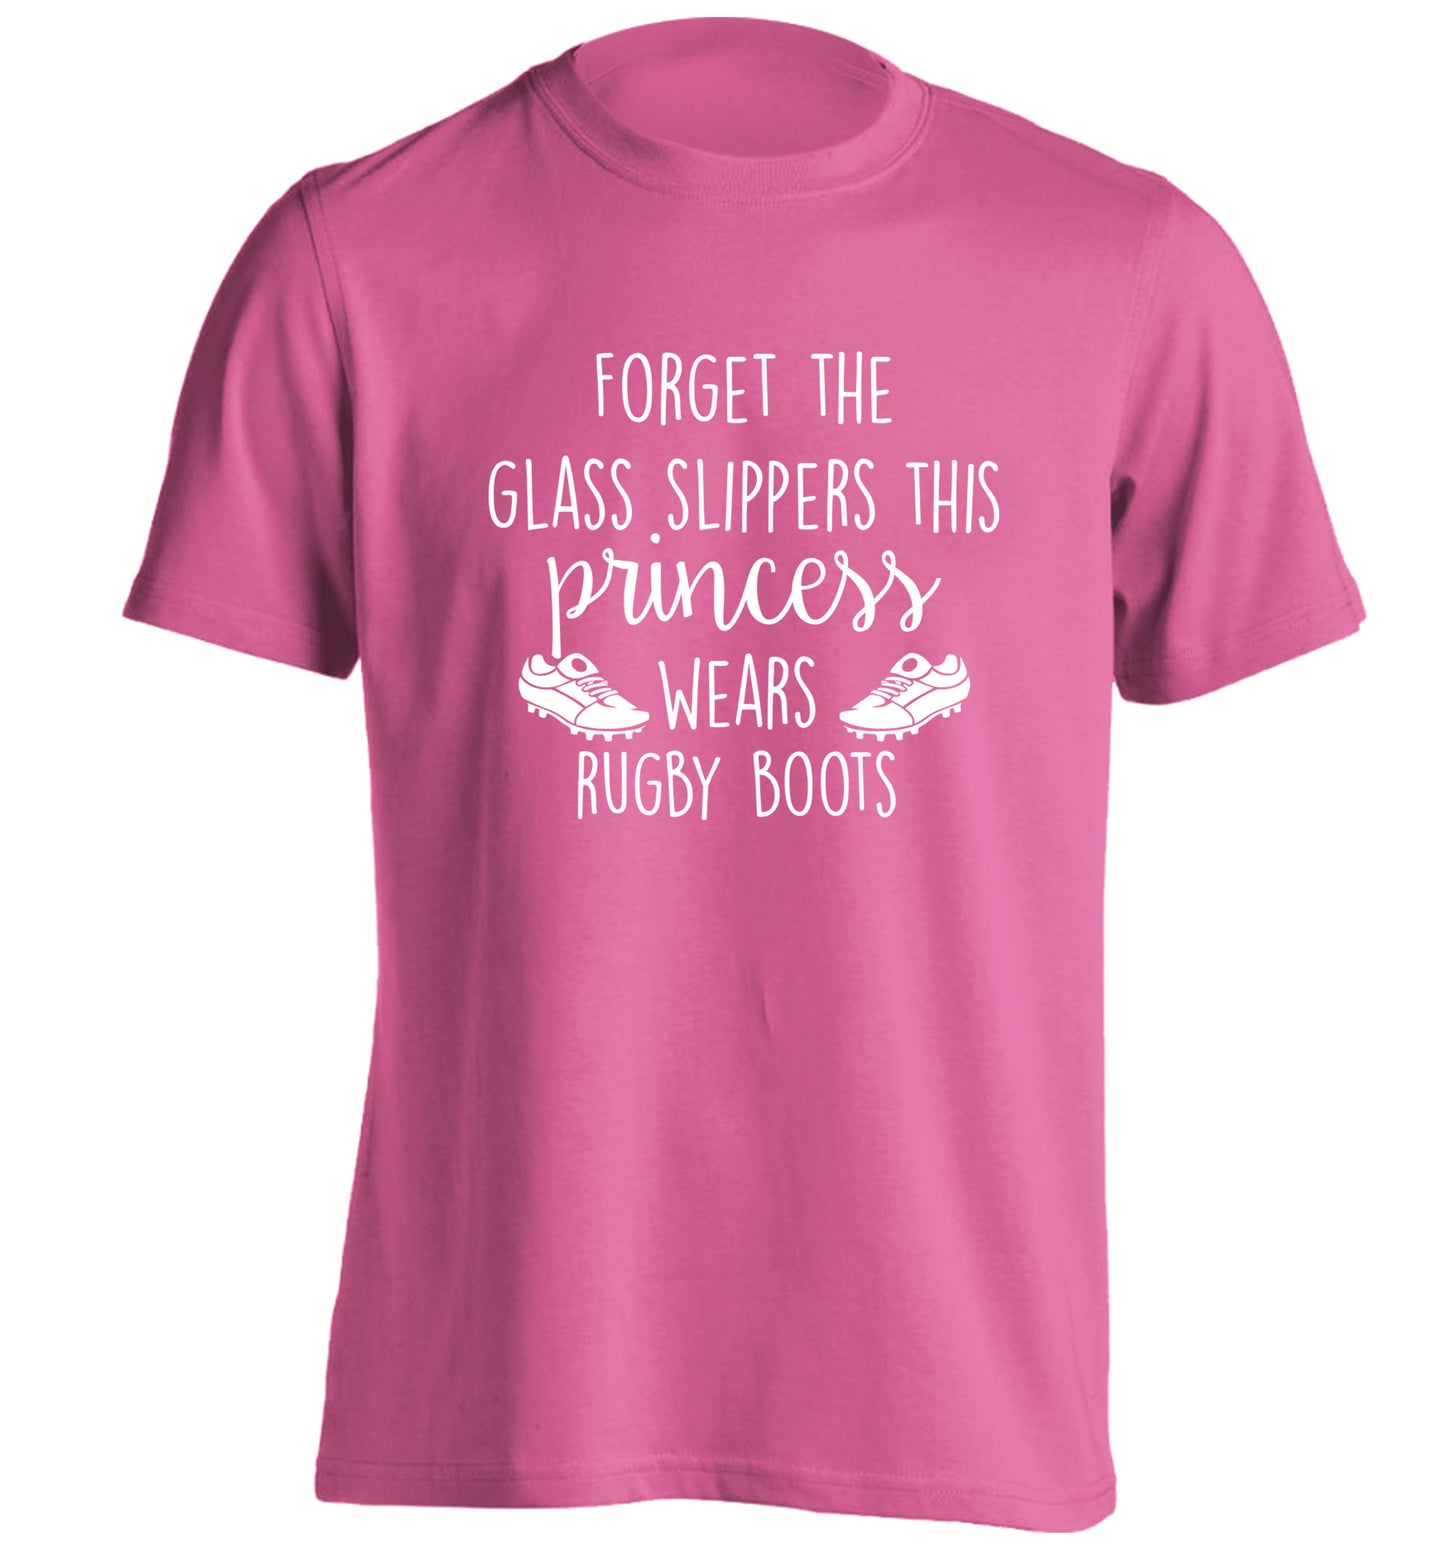 Forget the glass slippers this princess wears rugby boots adults unisex pink Tshirt 2XL